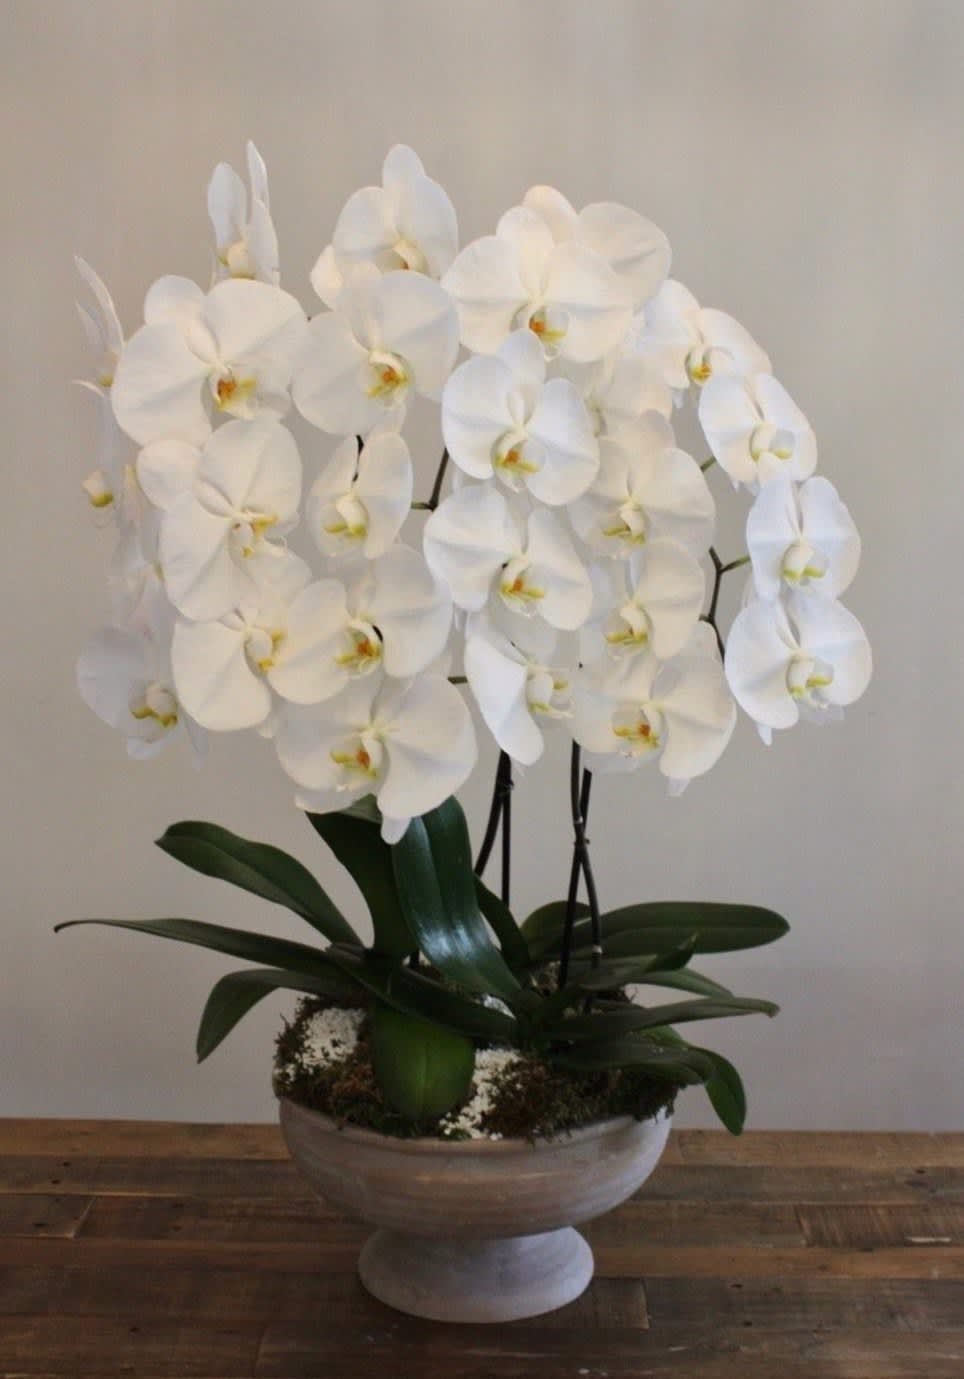 White Cascading Orchid Garden: This enchanting arrangement showcases stunning white orchids gracefully